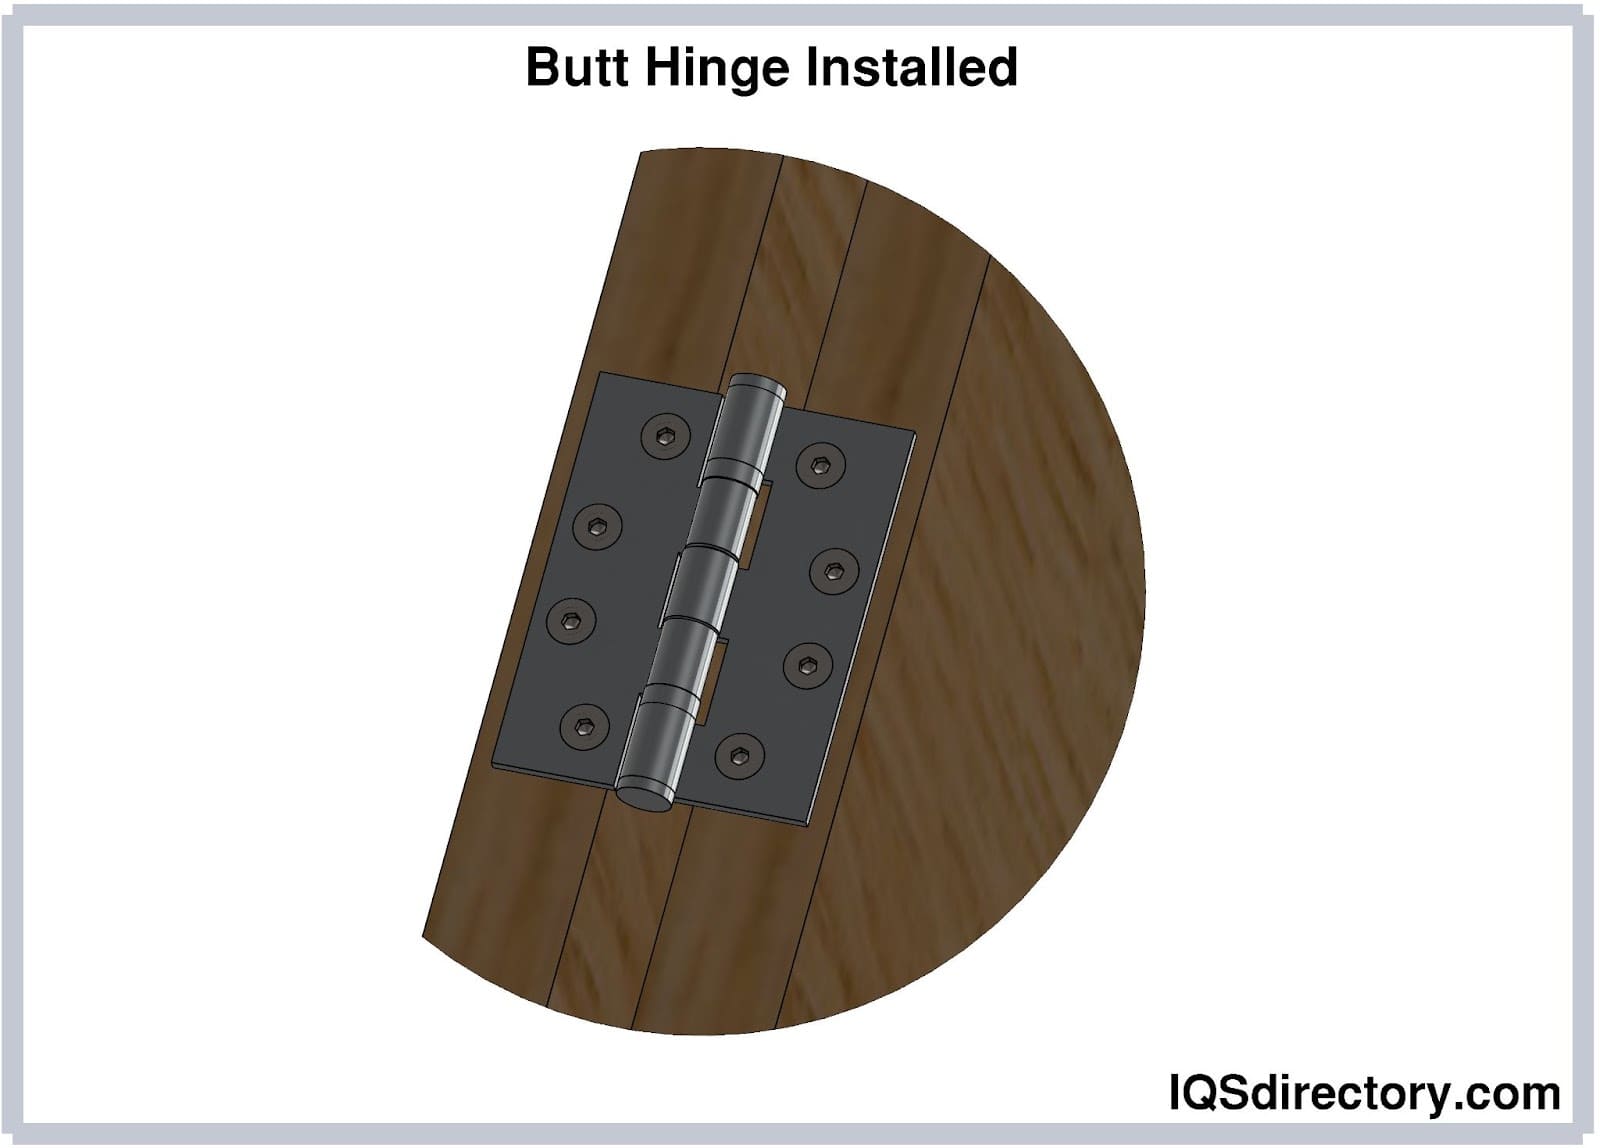 Butt Hinges: Types, Uses, Features and Benefits